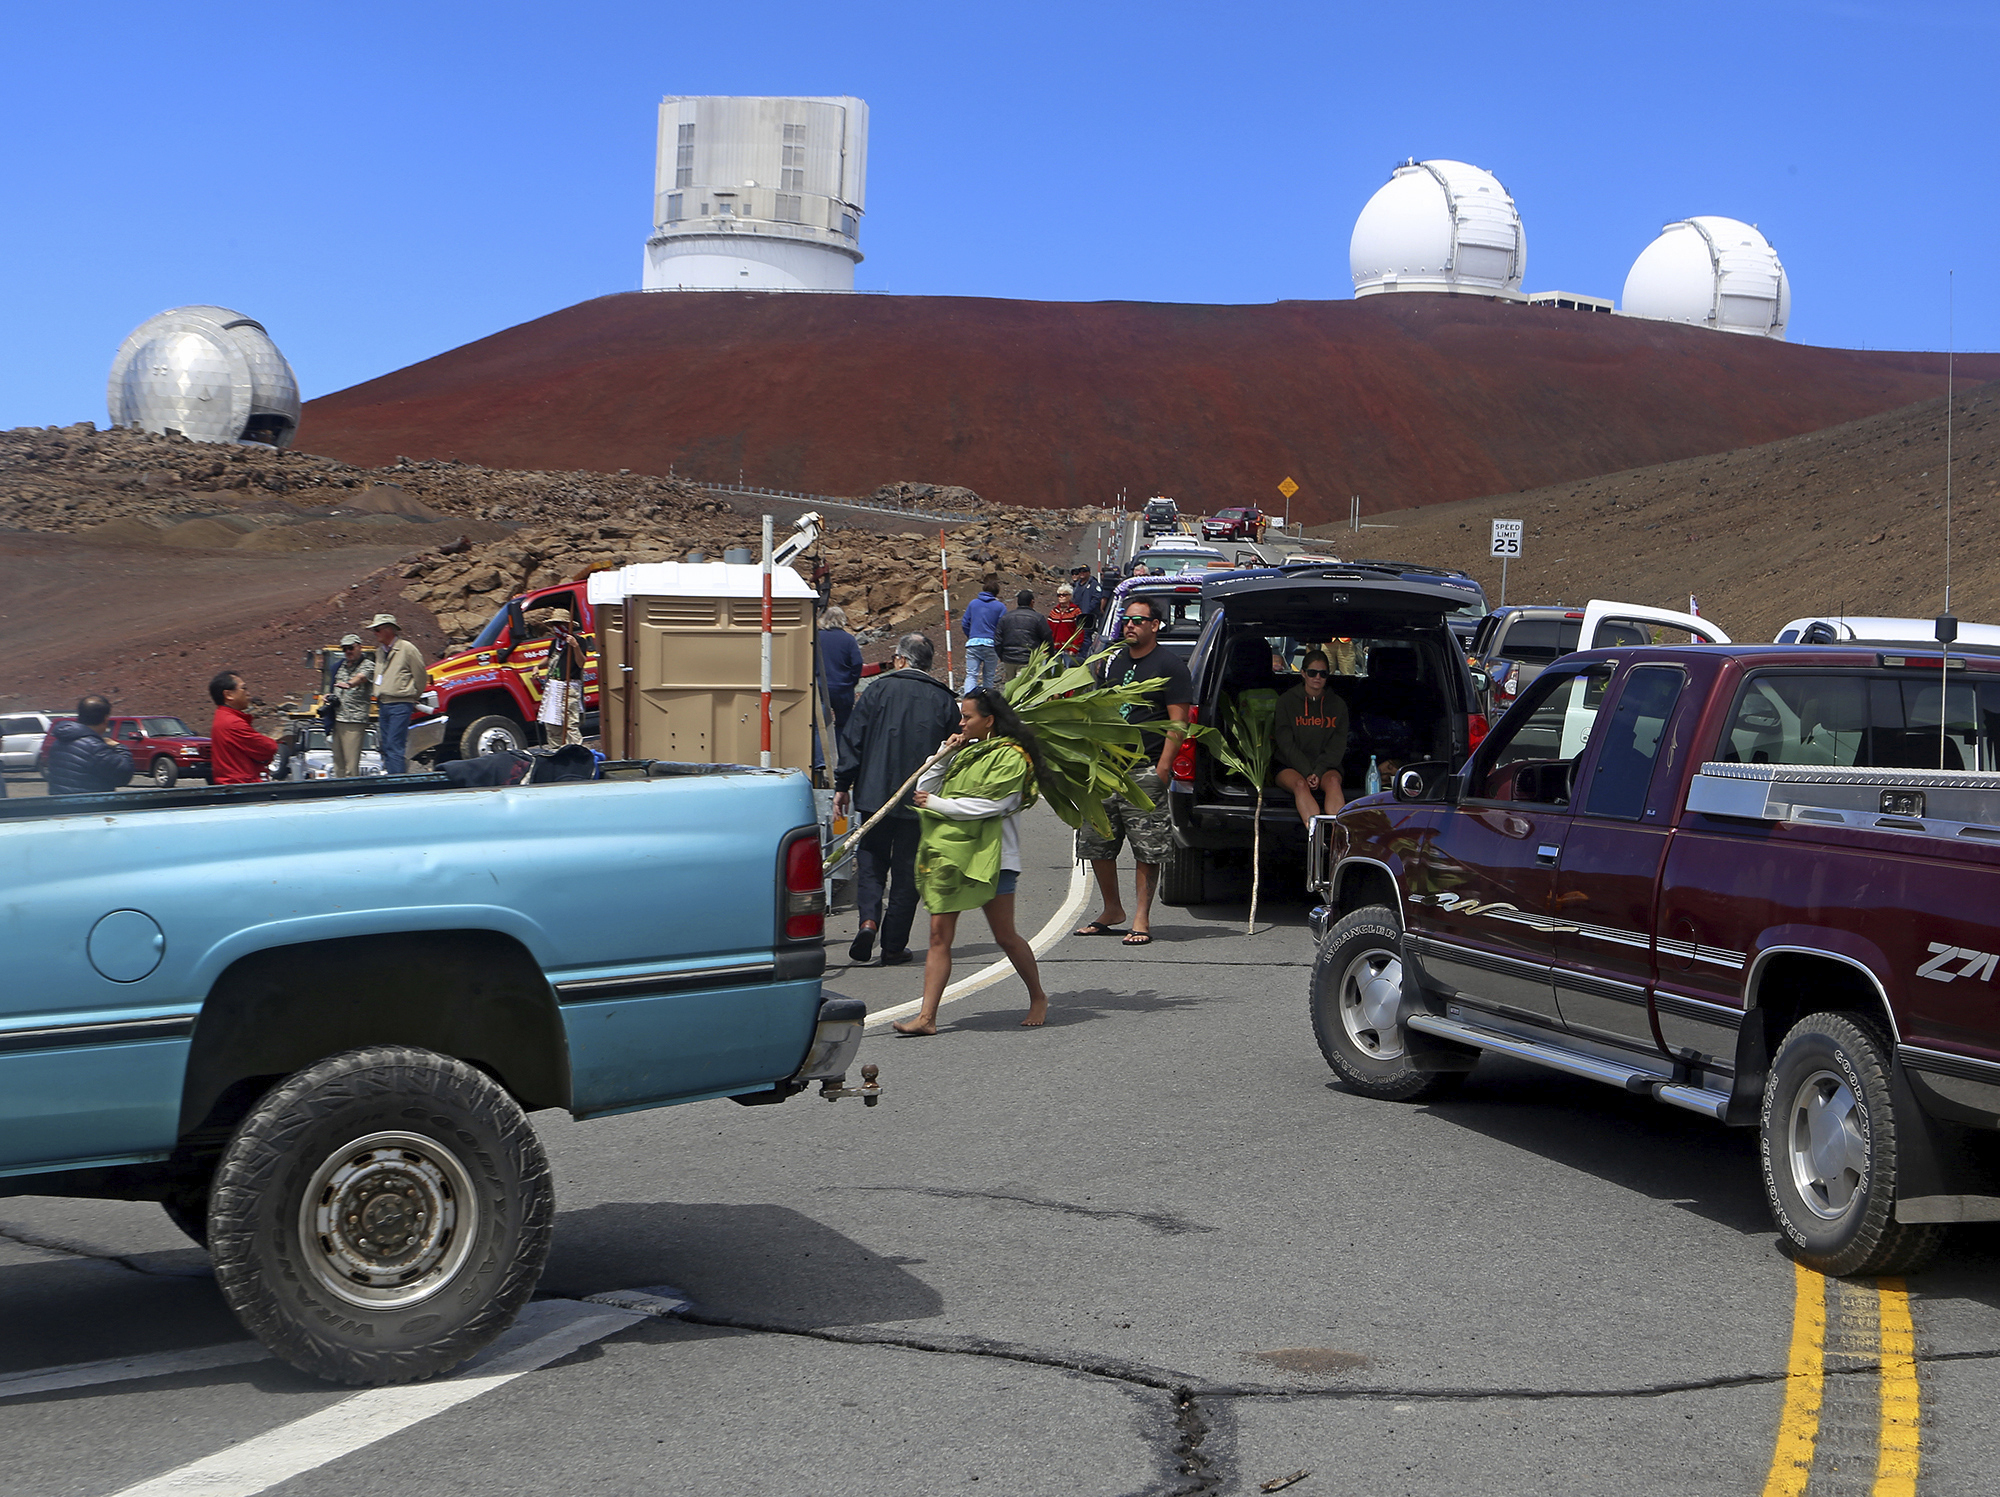 Protesters block vehicles from getting to the Thirty Meter Telescope groundbreaking ceremony site at Mauna Kea, Hawaii, in 2014